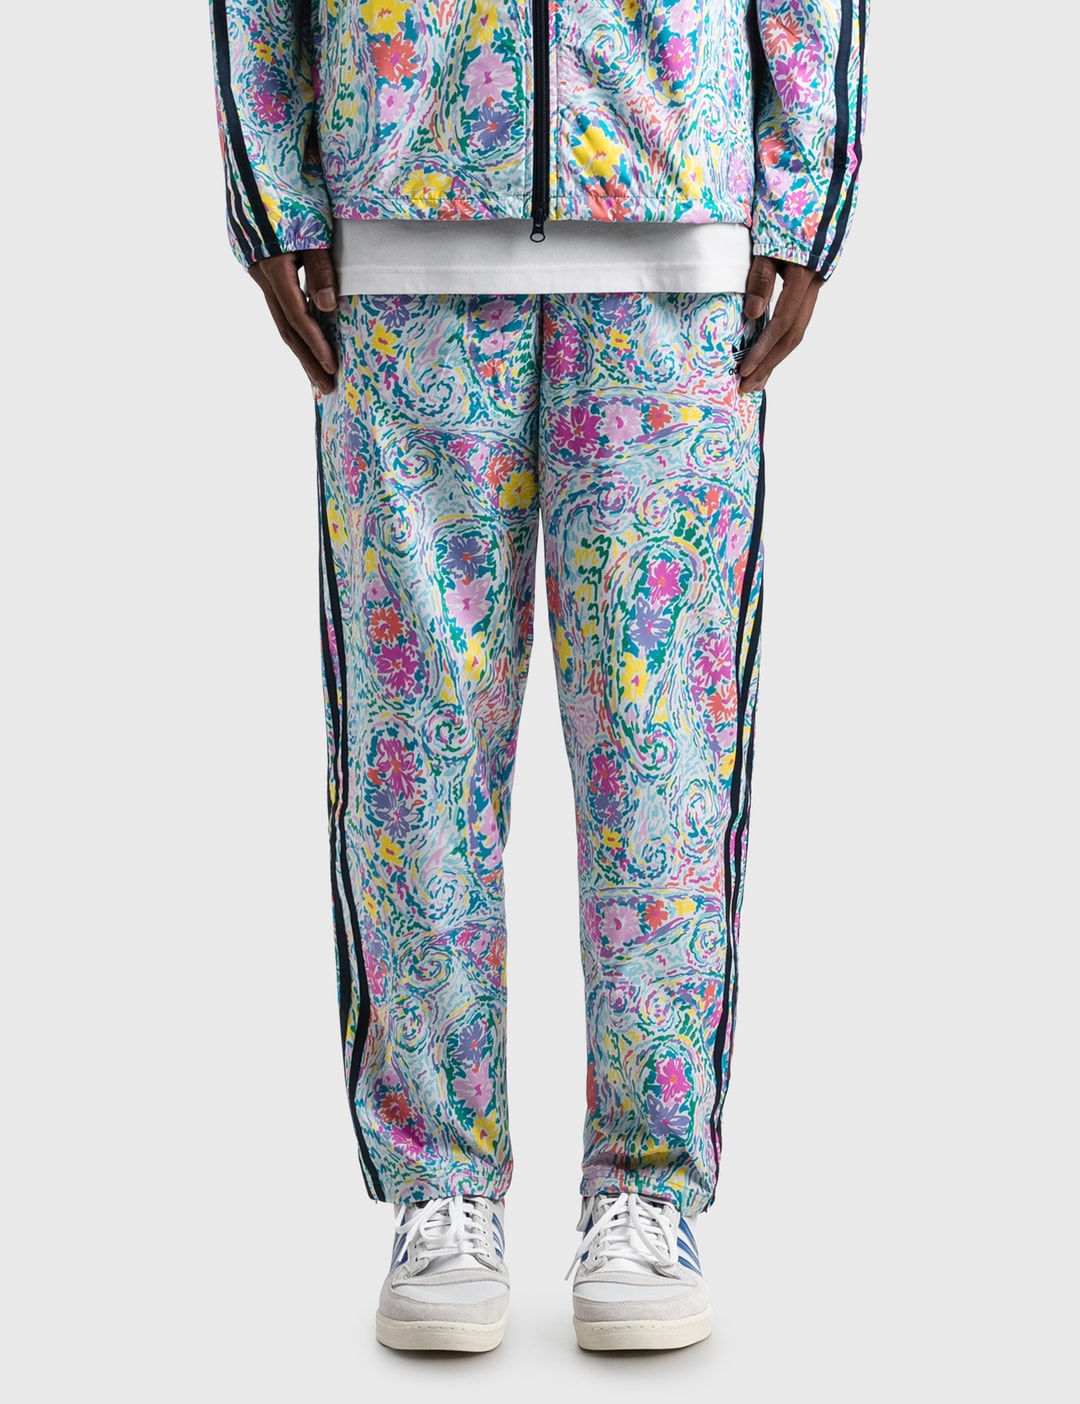 Adidas Originals - Noah Adidas Floral Track Pants | HBX Globally Curated and Lifestyle by Hypebeast